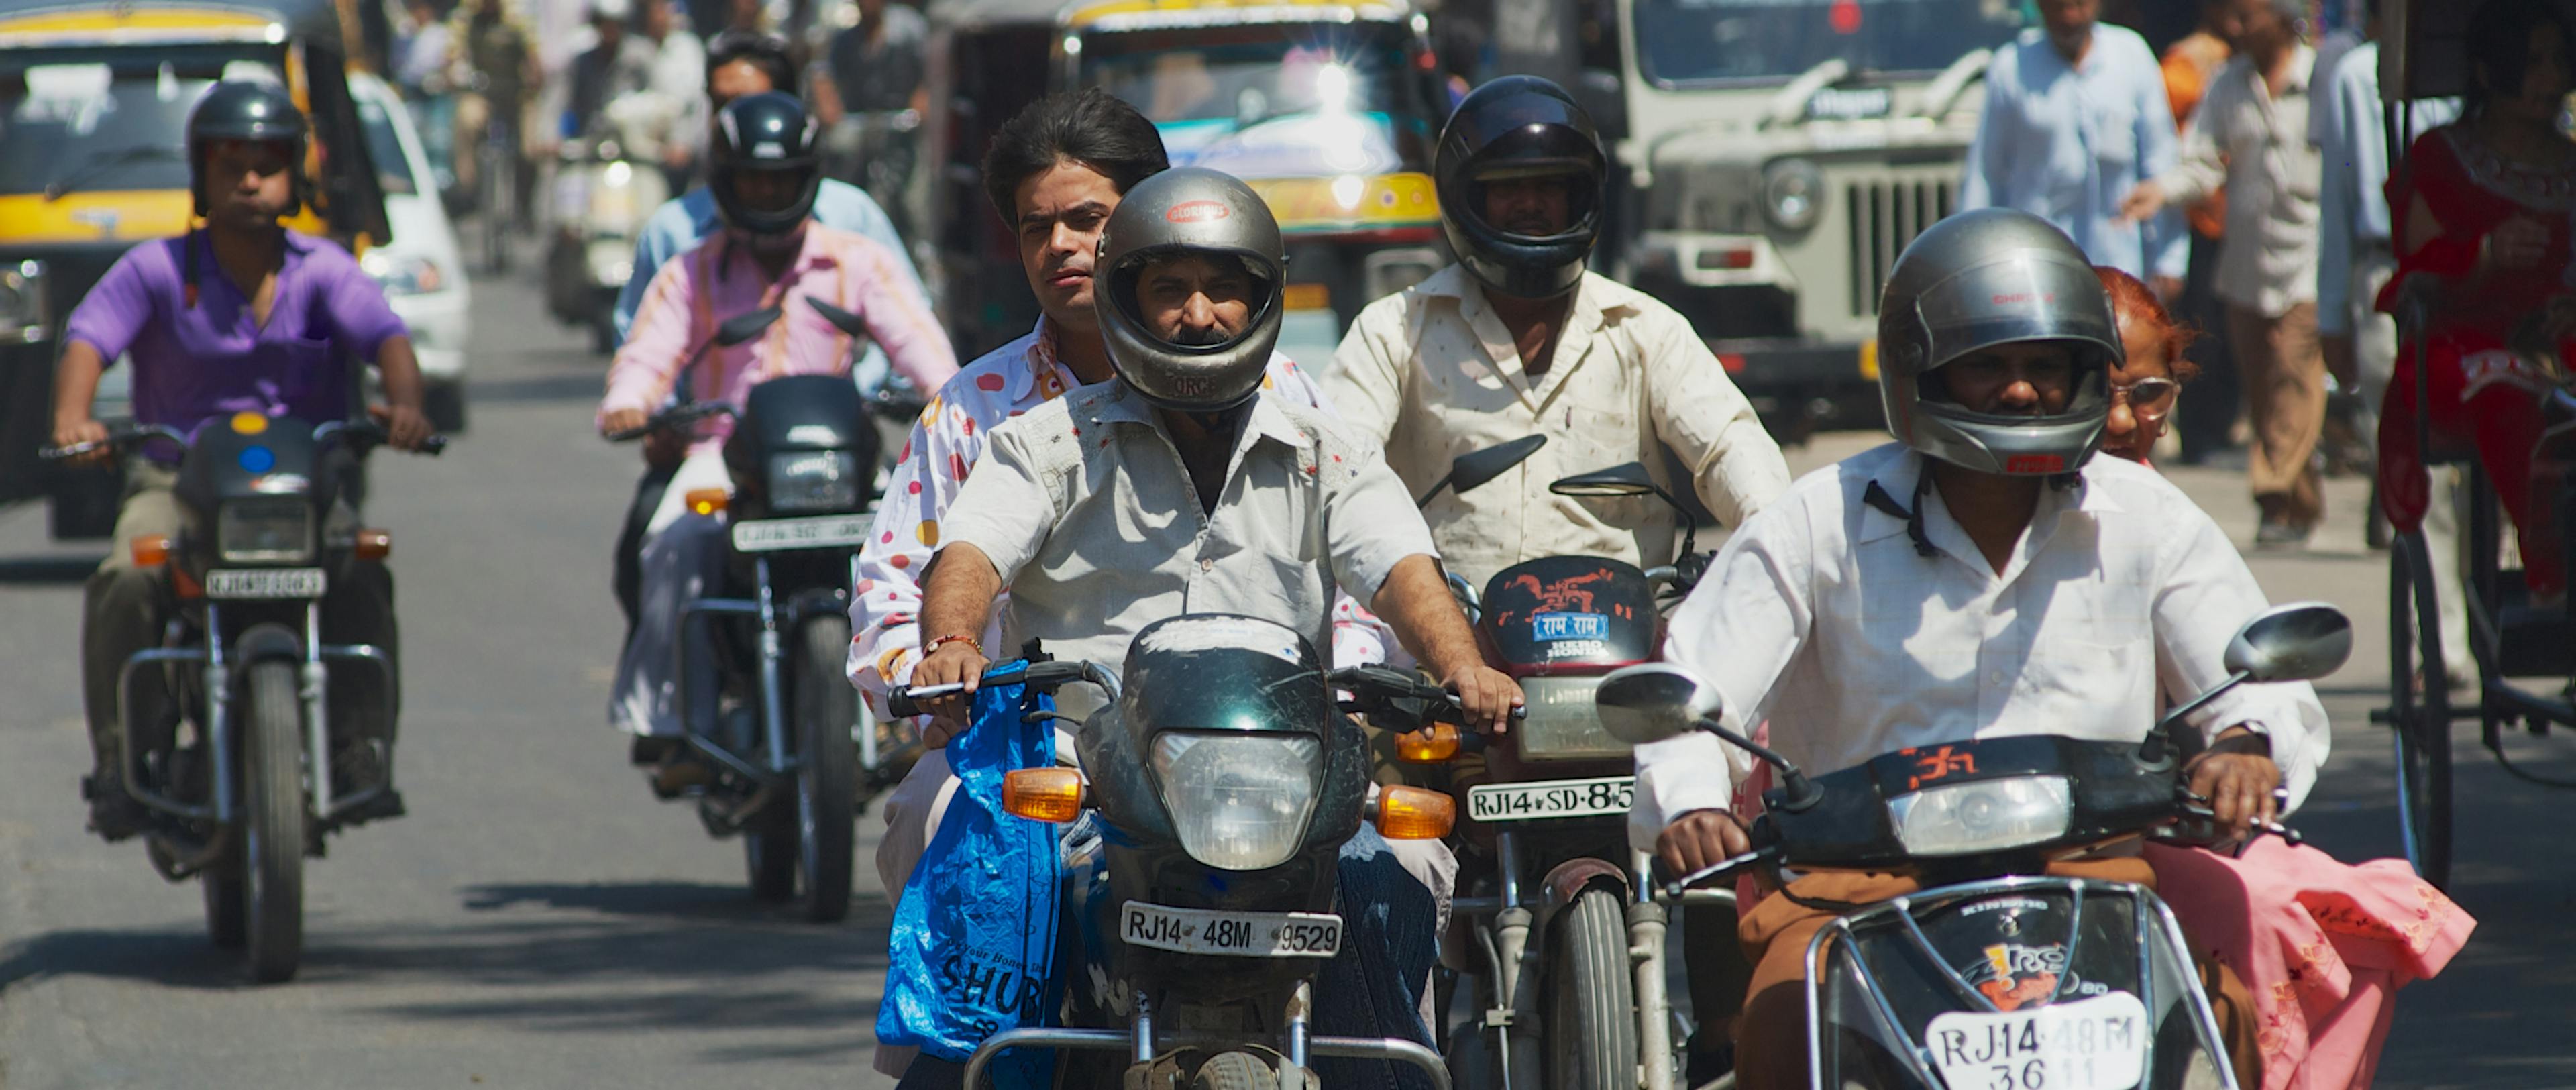 People riding a two-wheeler on the road